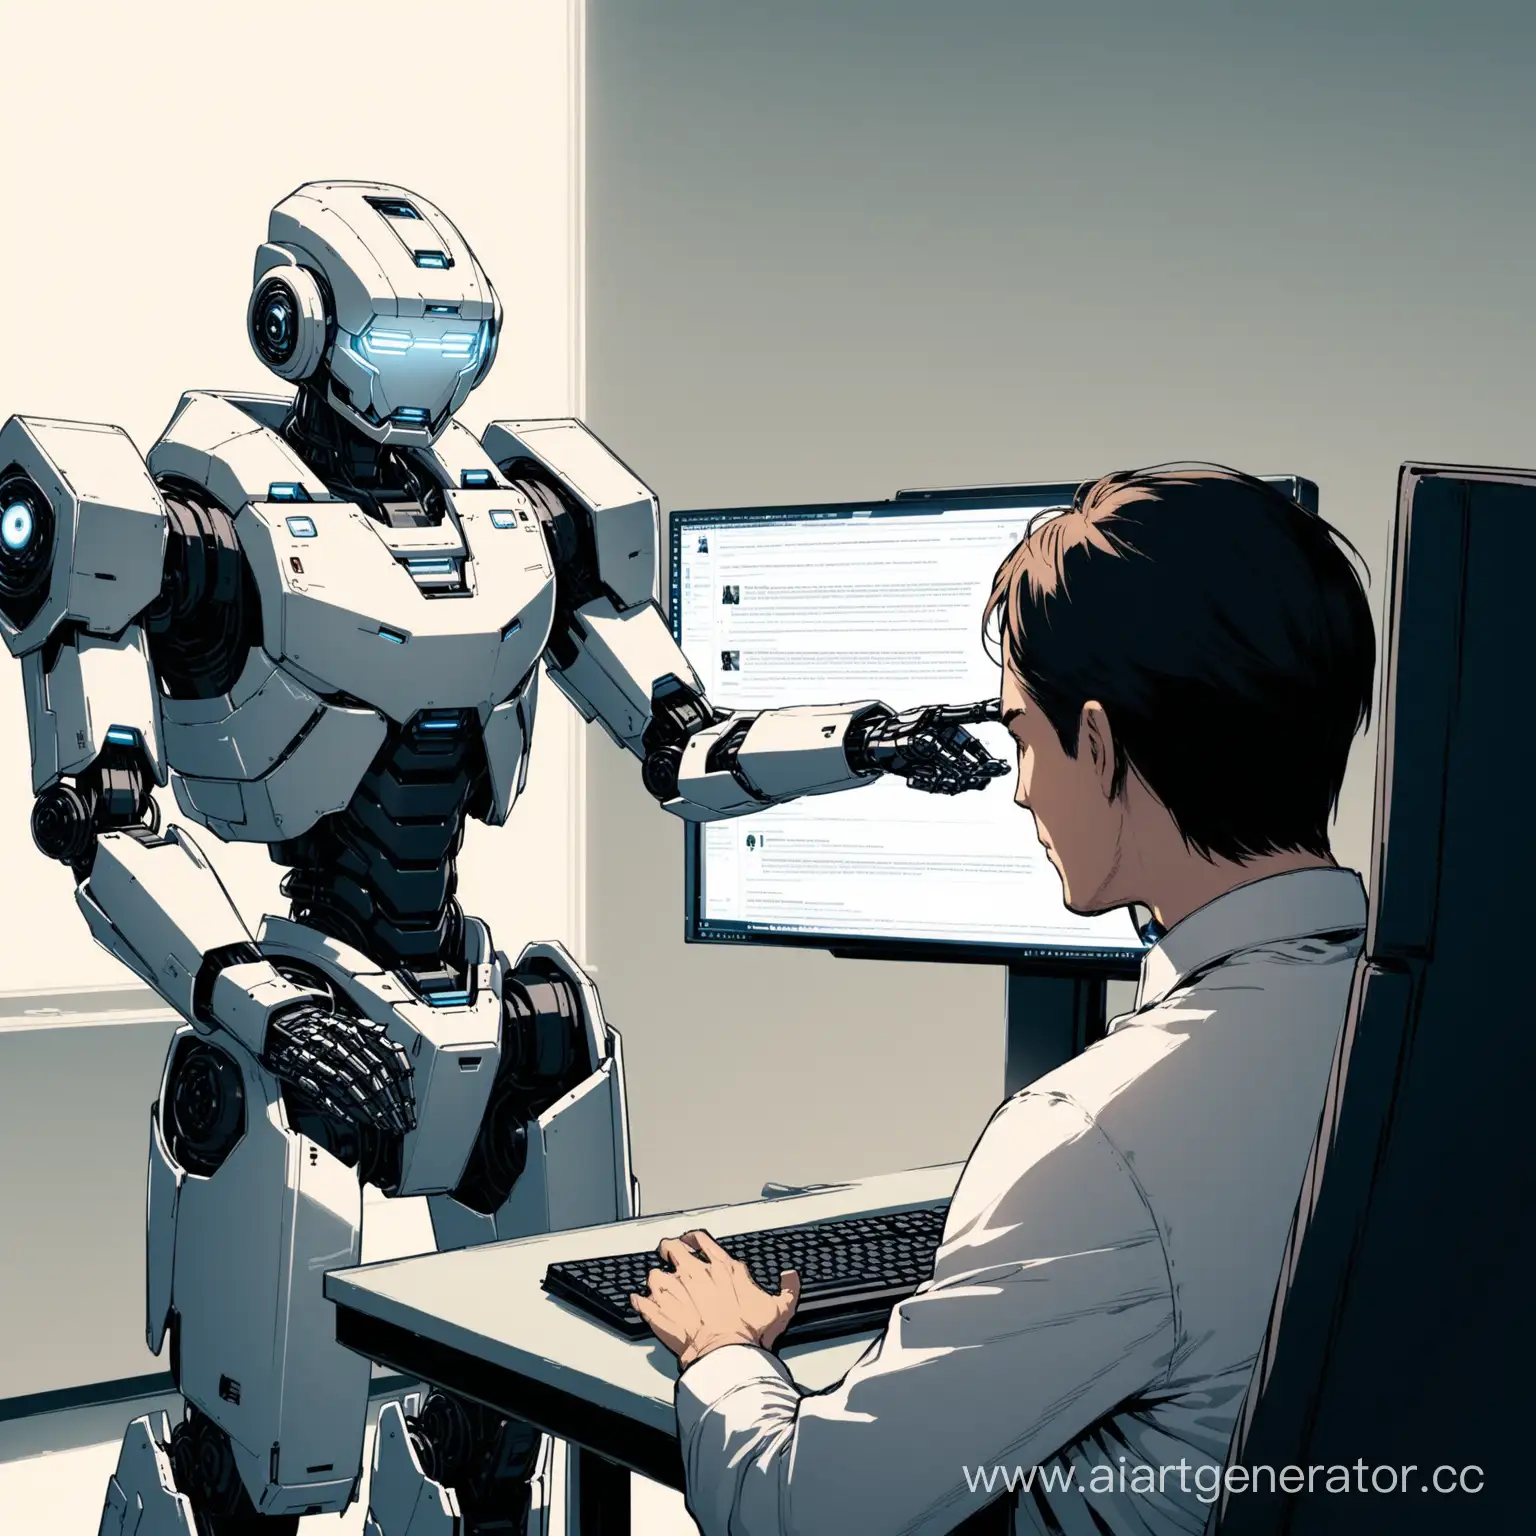 Man-and-Robot-Discussion-on-Computer-Screen-Text